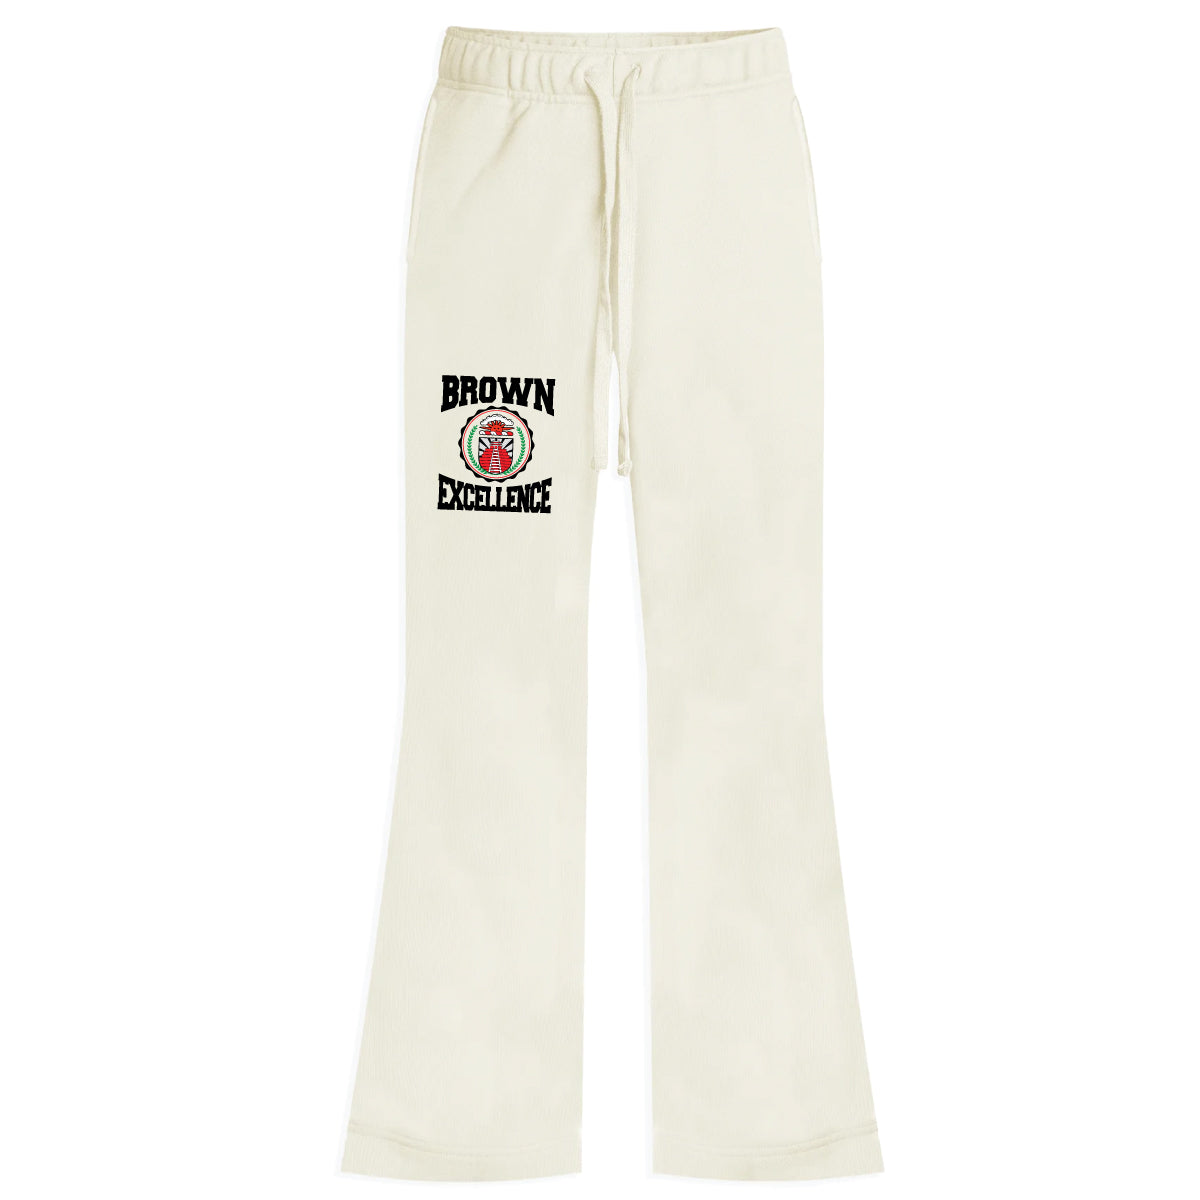 BROWN EXCELLENCE FLARED PANT - CREAM